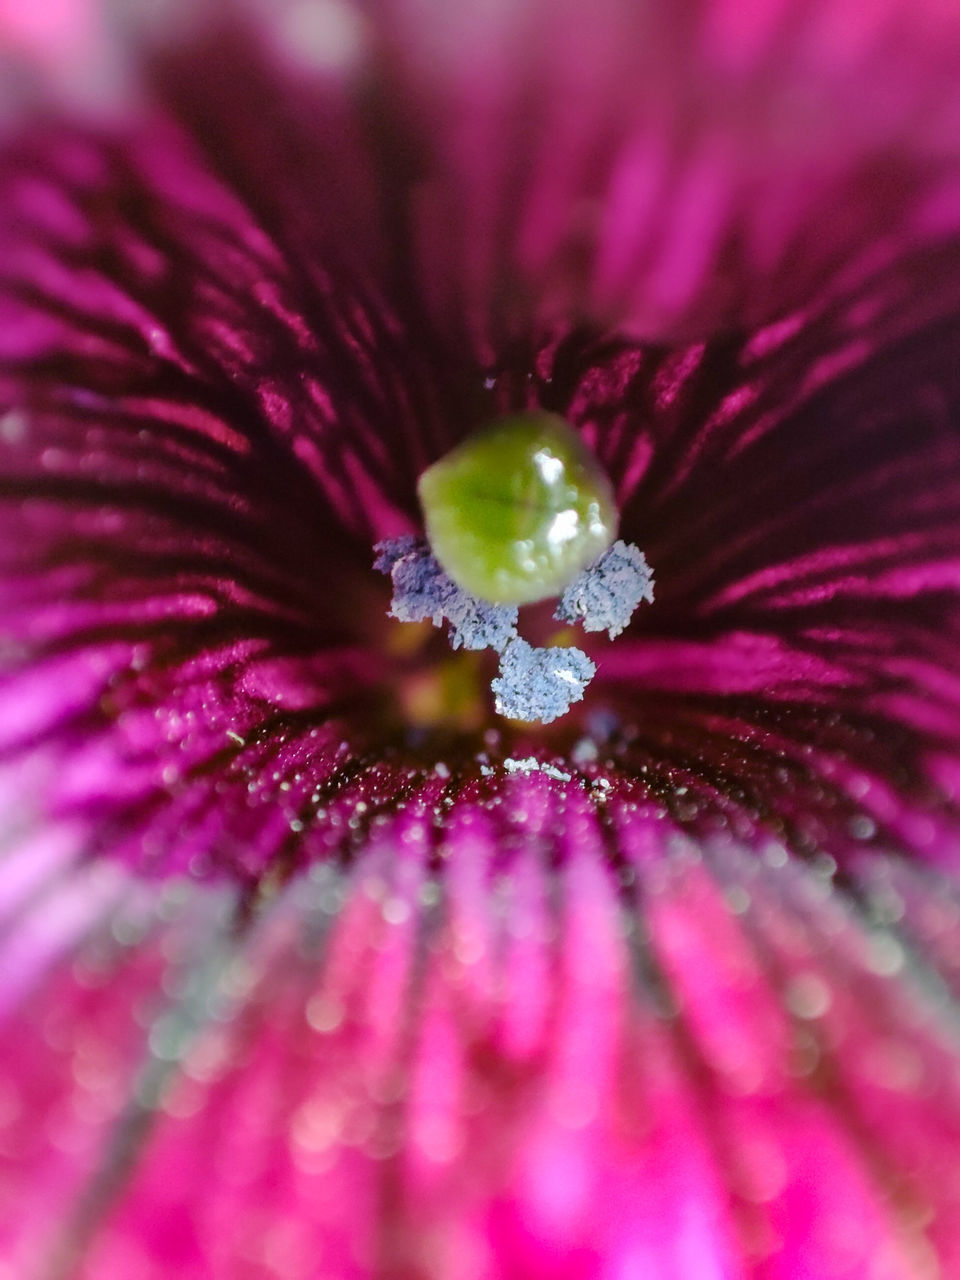 EXTREME CLOSE-UP OF PURPLE FLOWER